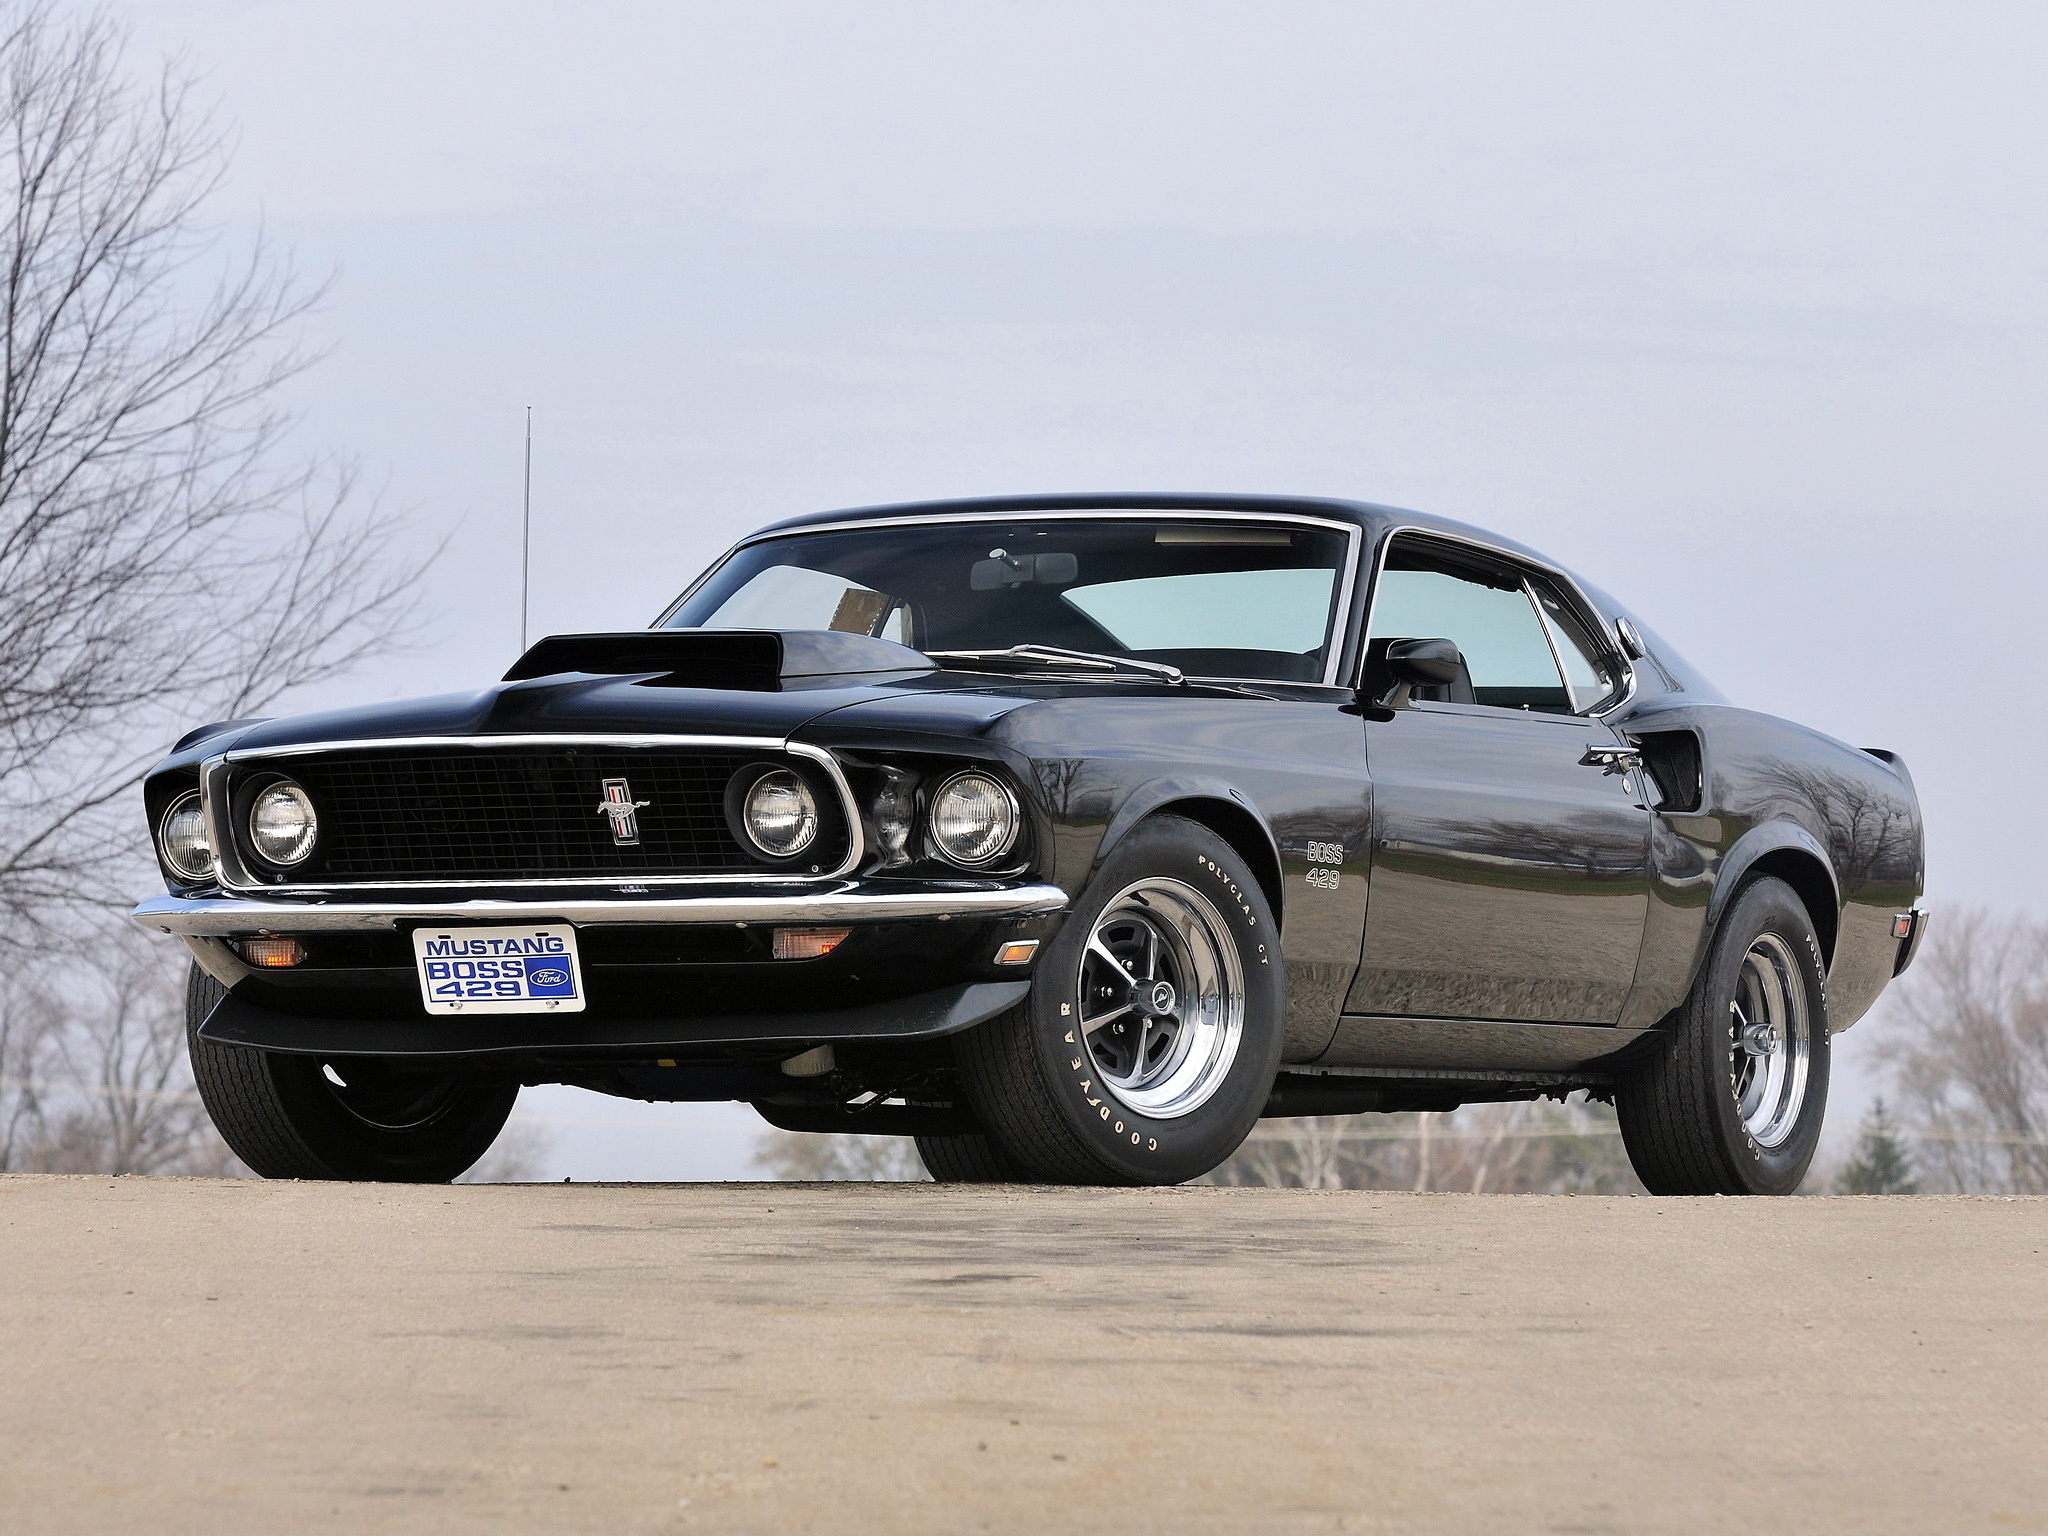 muscle car, mustang, 429, 1969, ford, cars, black, boss